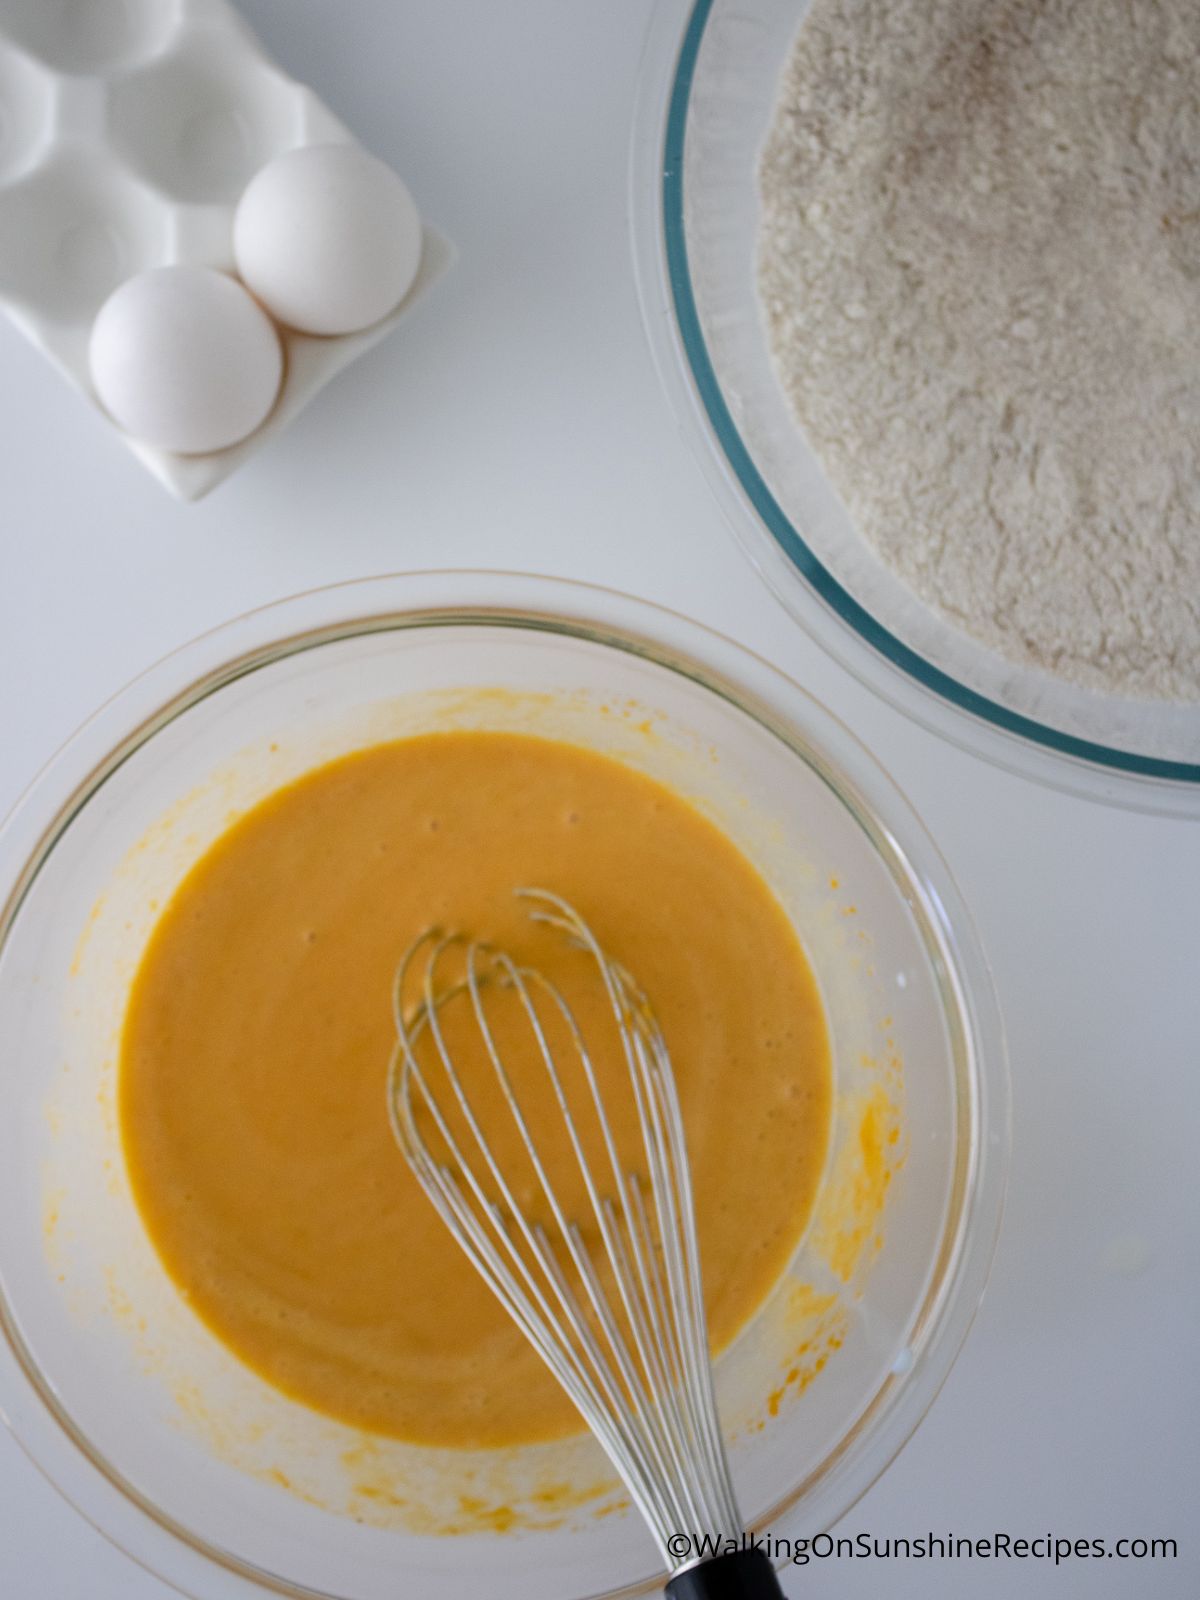 Eggs, bowl of dry ingredients, and bowl of pumpkin mixture